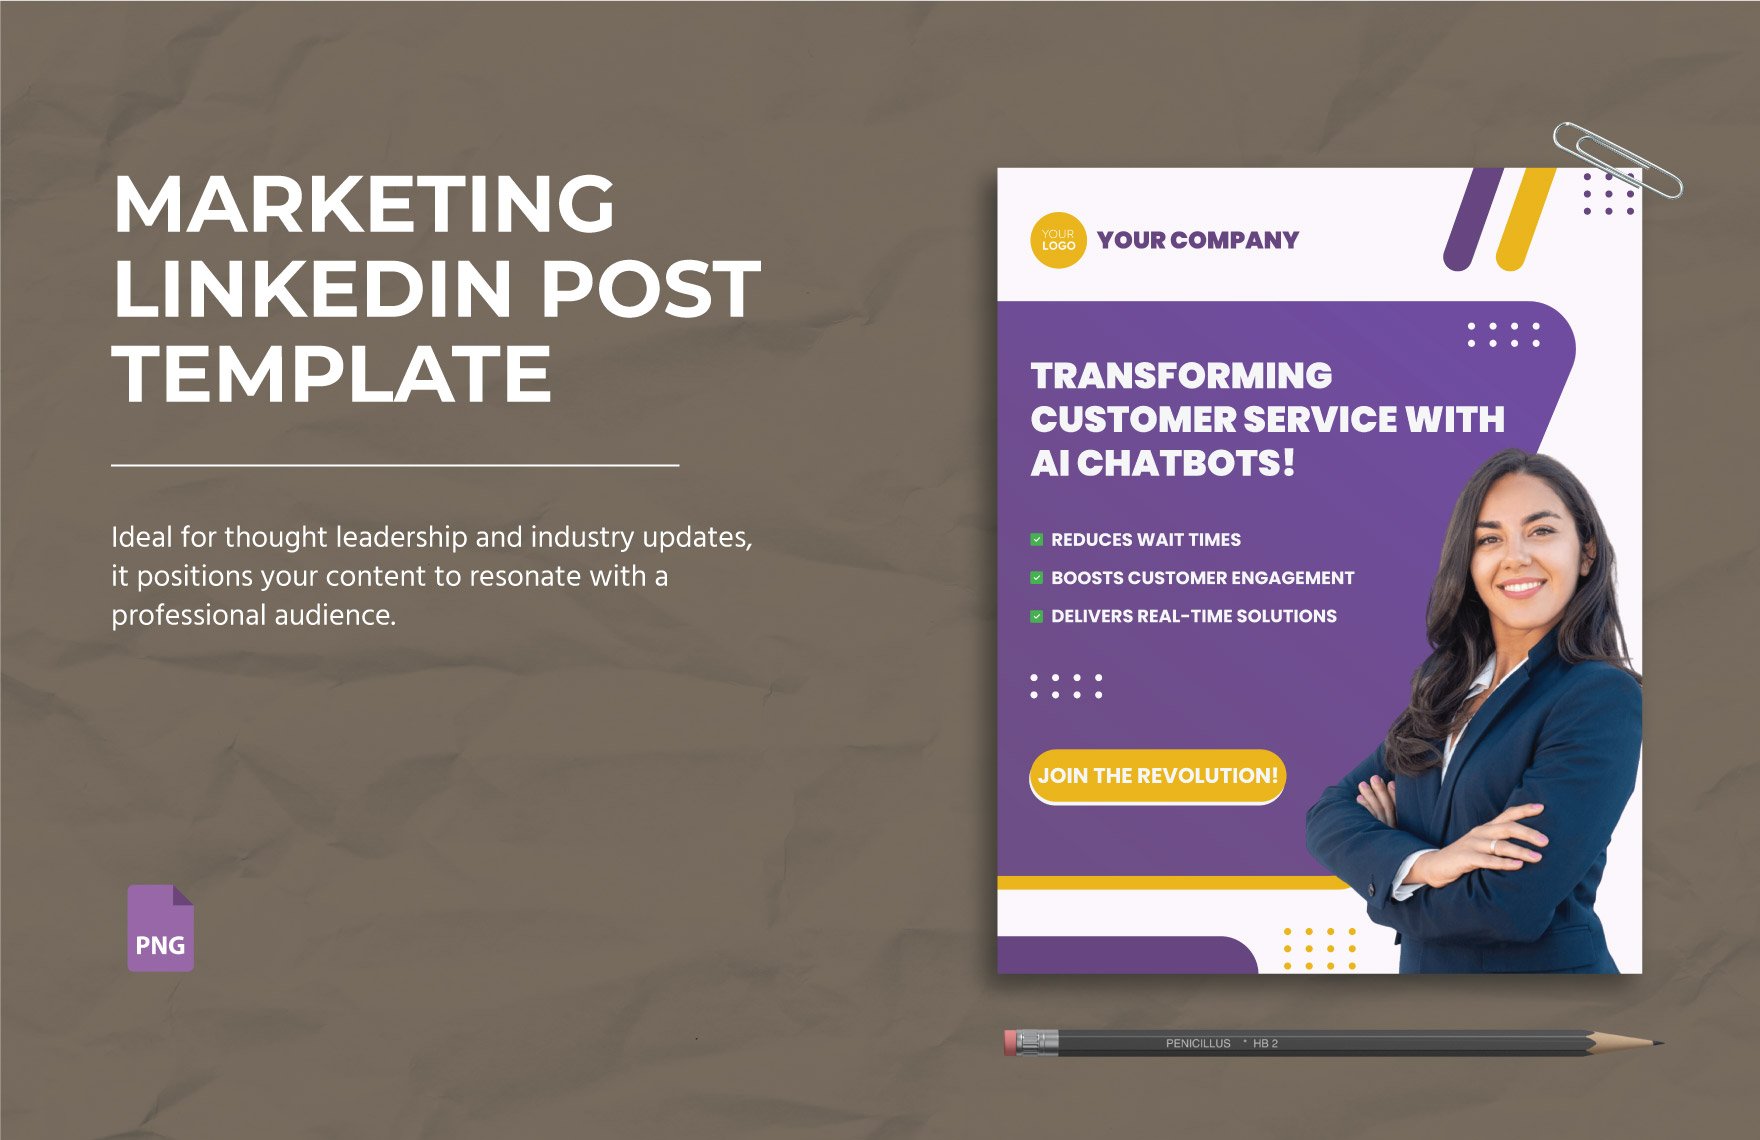 Marketing LinkedIn Post Template in PNG